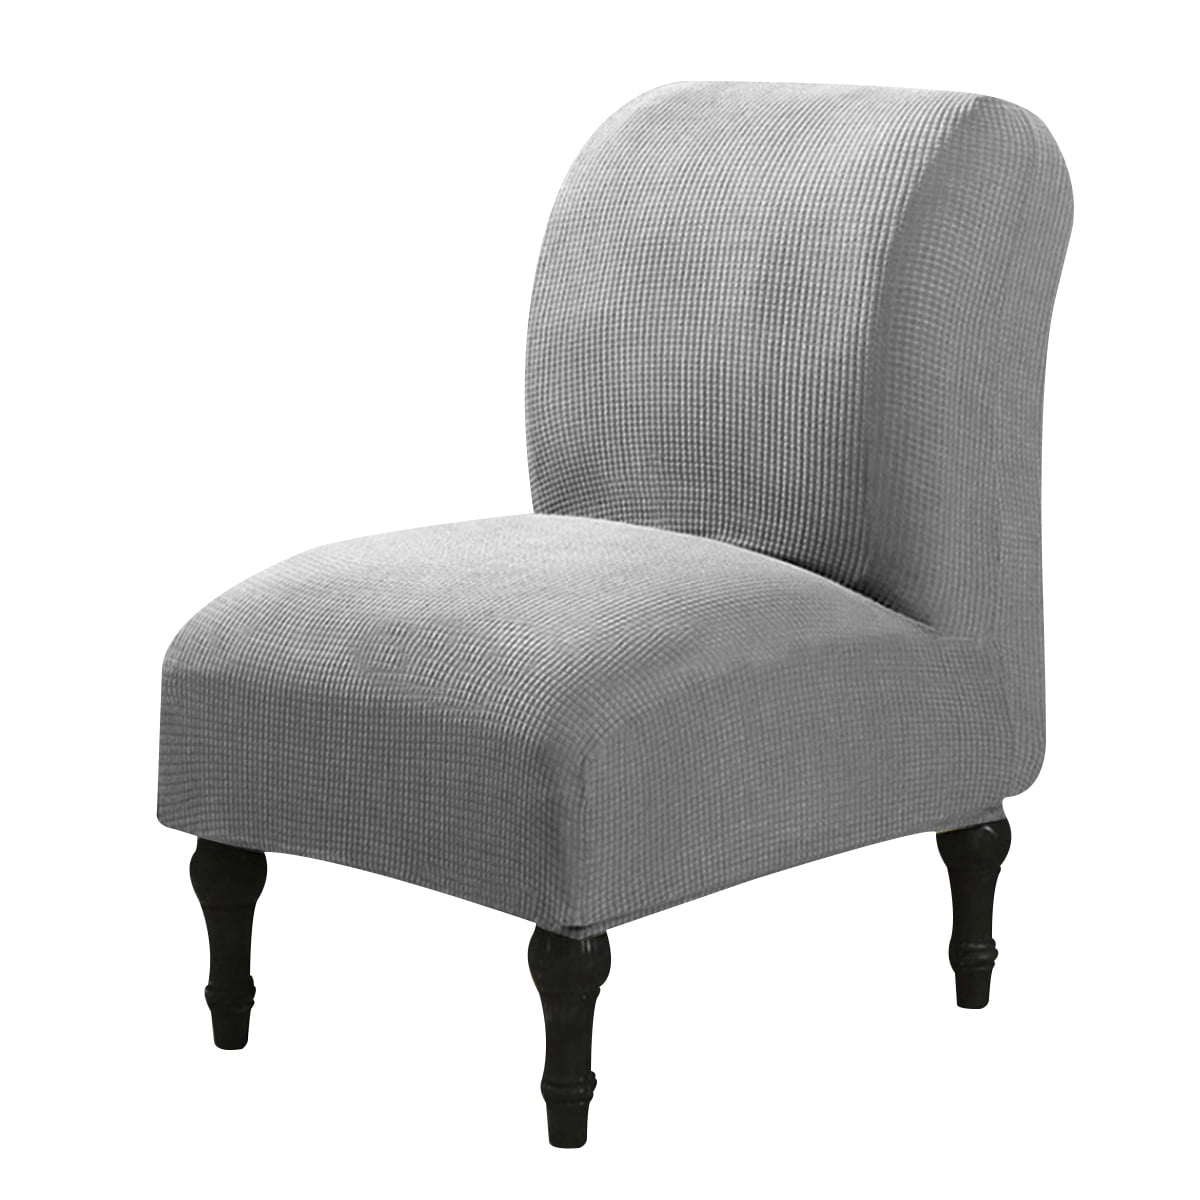 Details about   Spandex Slipper Chair Slipcovers Armless Accent Chair Protector Decor Navy 